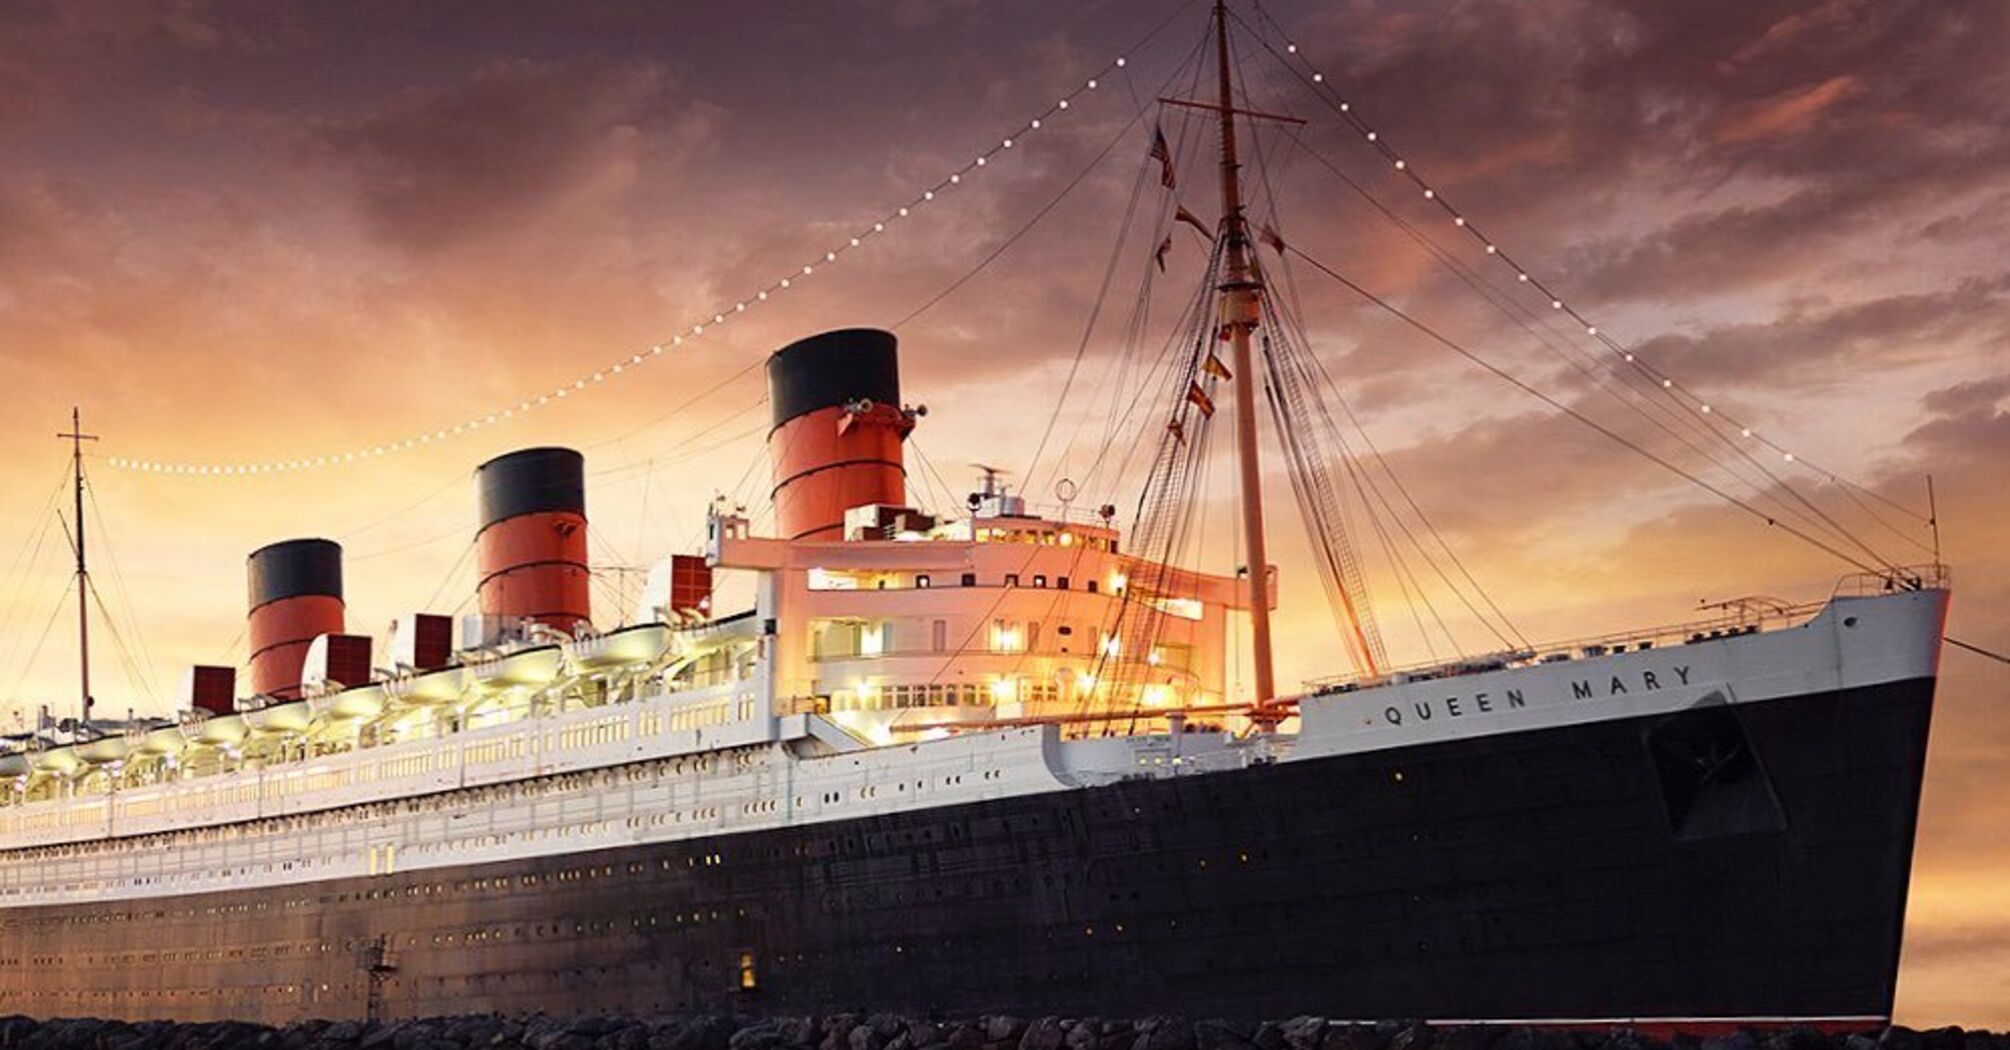 Mystical haunted hotel in America. Stop at the ship "Queen Mary," California state